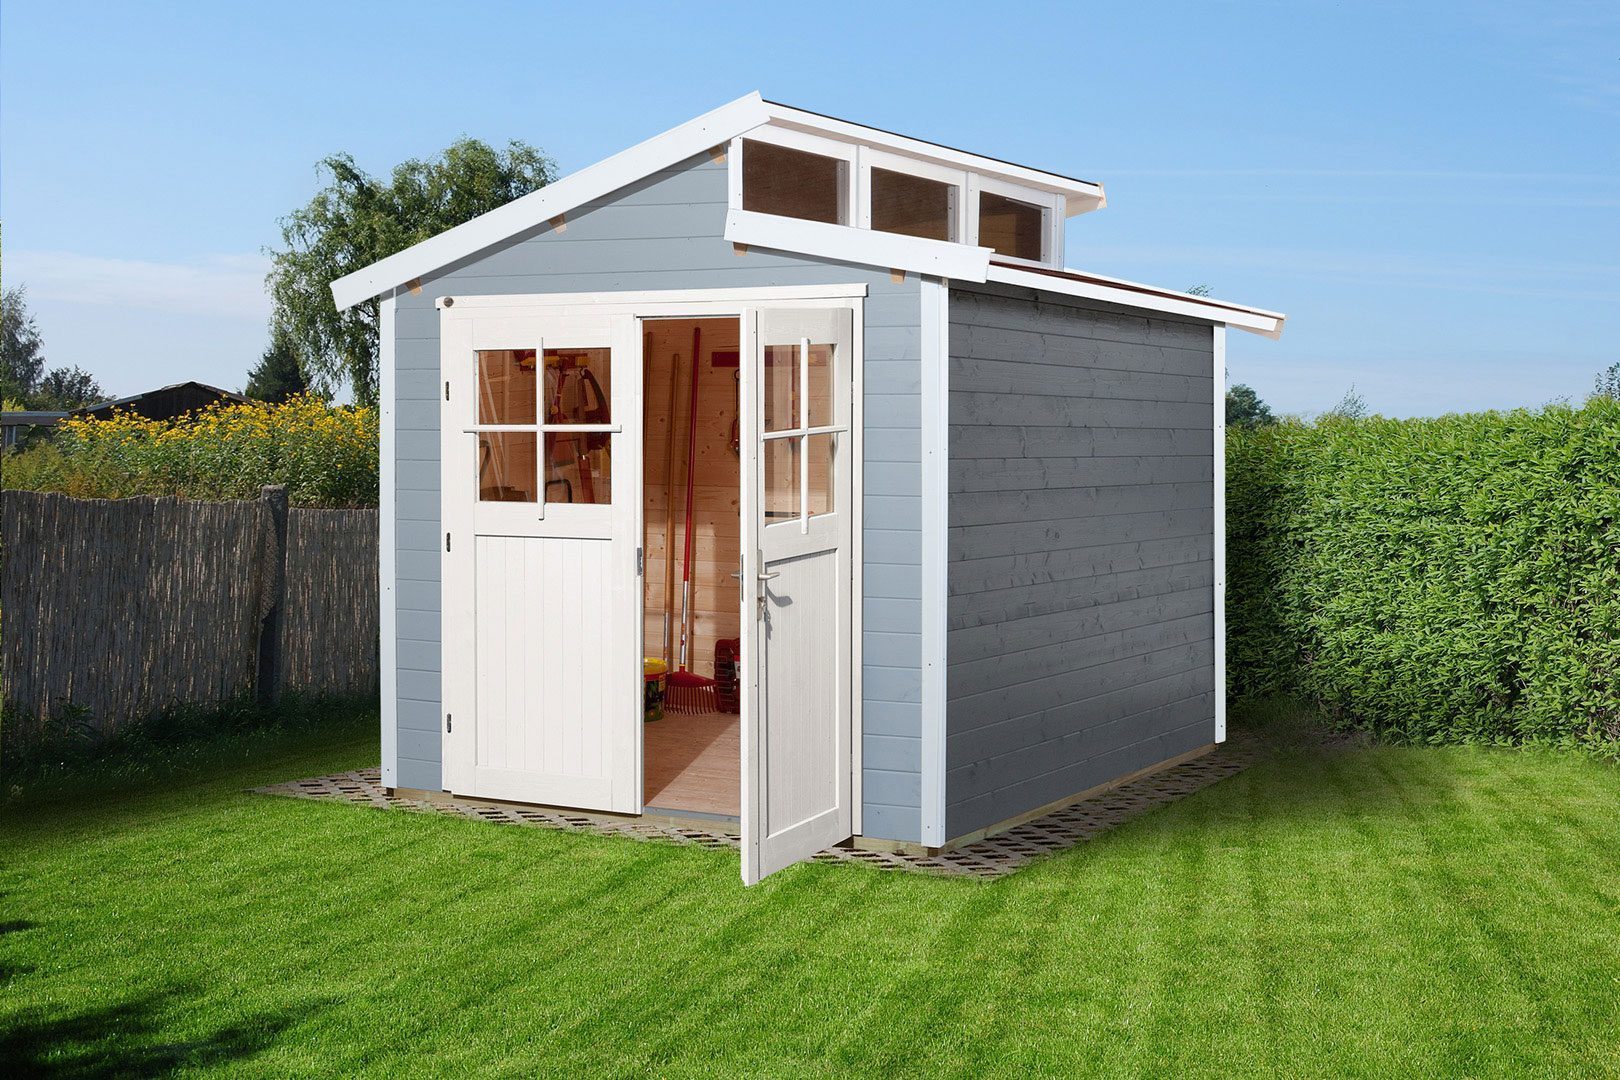 Heavenly Weka Garden Shed - model 226 with an offset roof shape